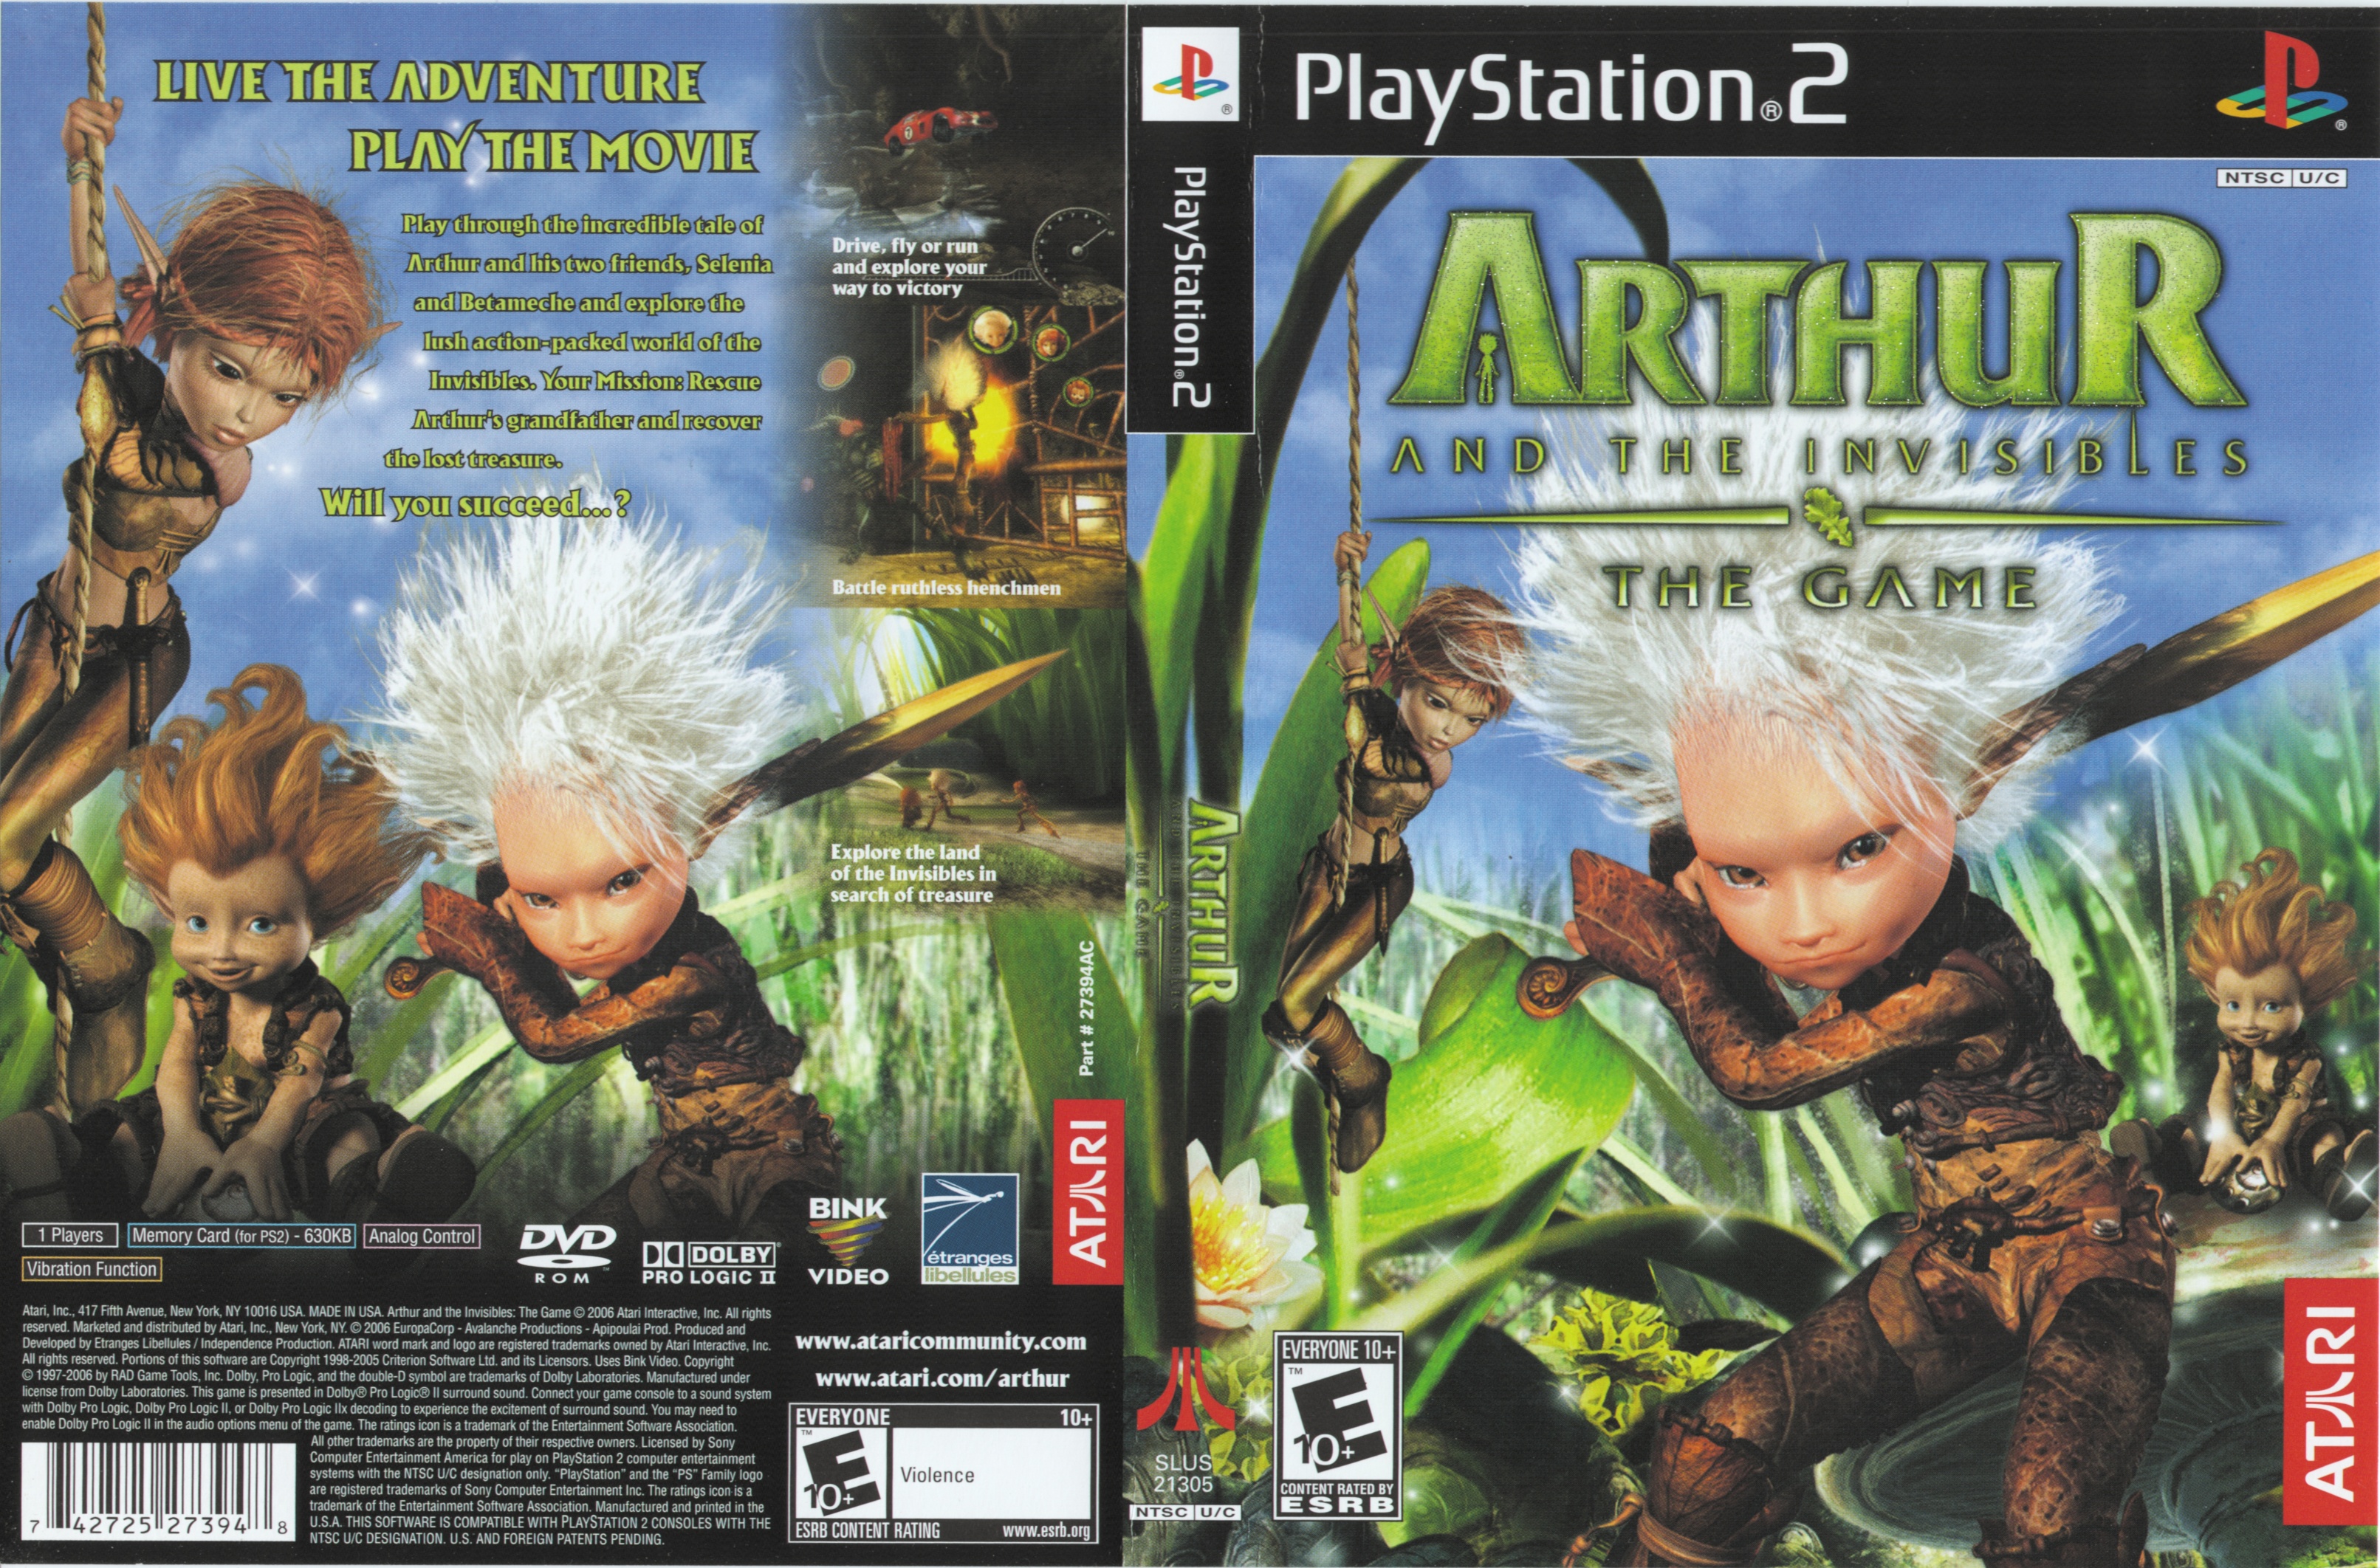 Arthur and the Invisibles - The Game PS2 cover.